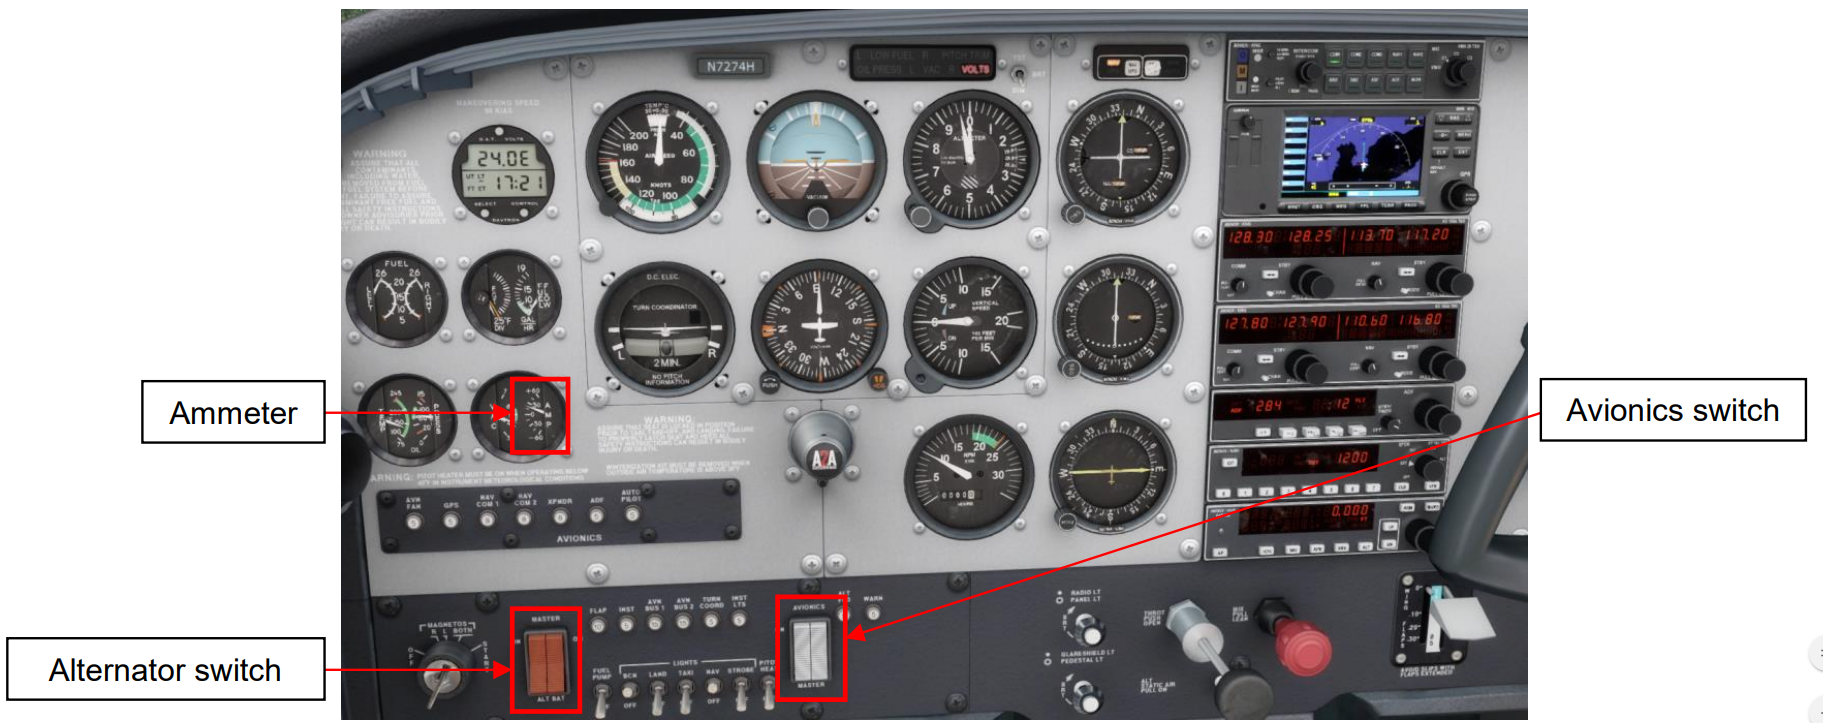 c172_powered_up_panel.png